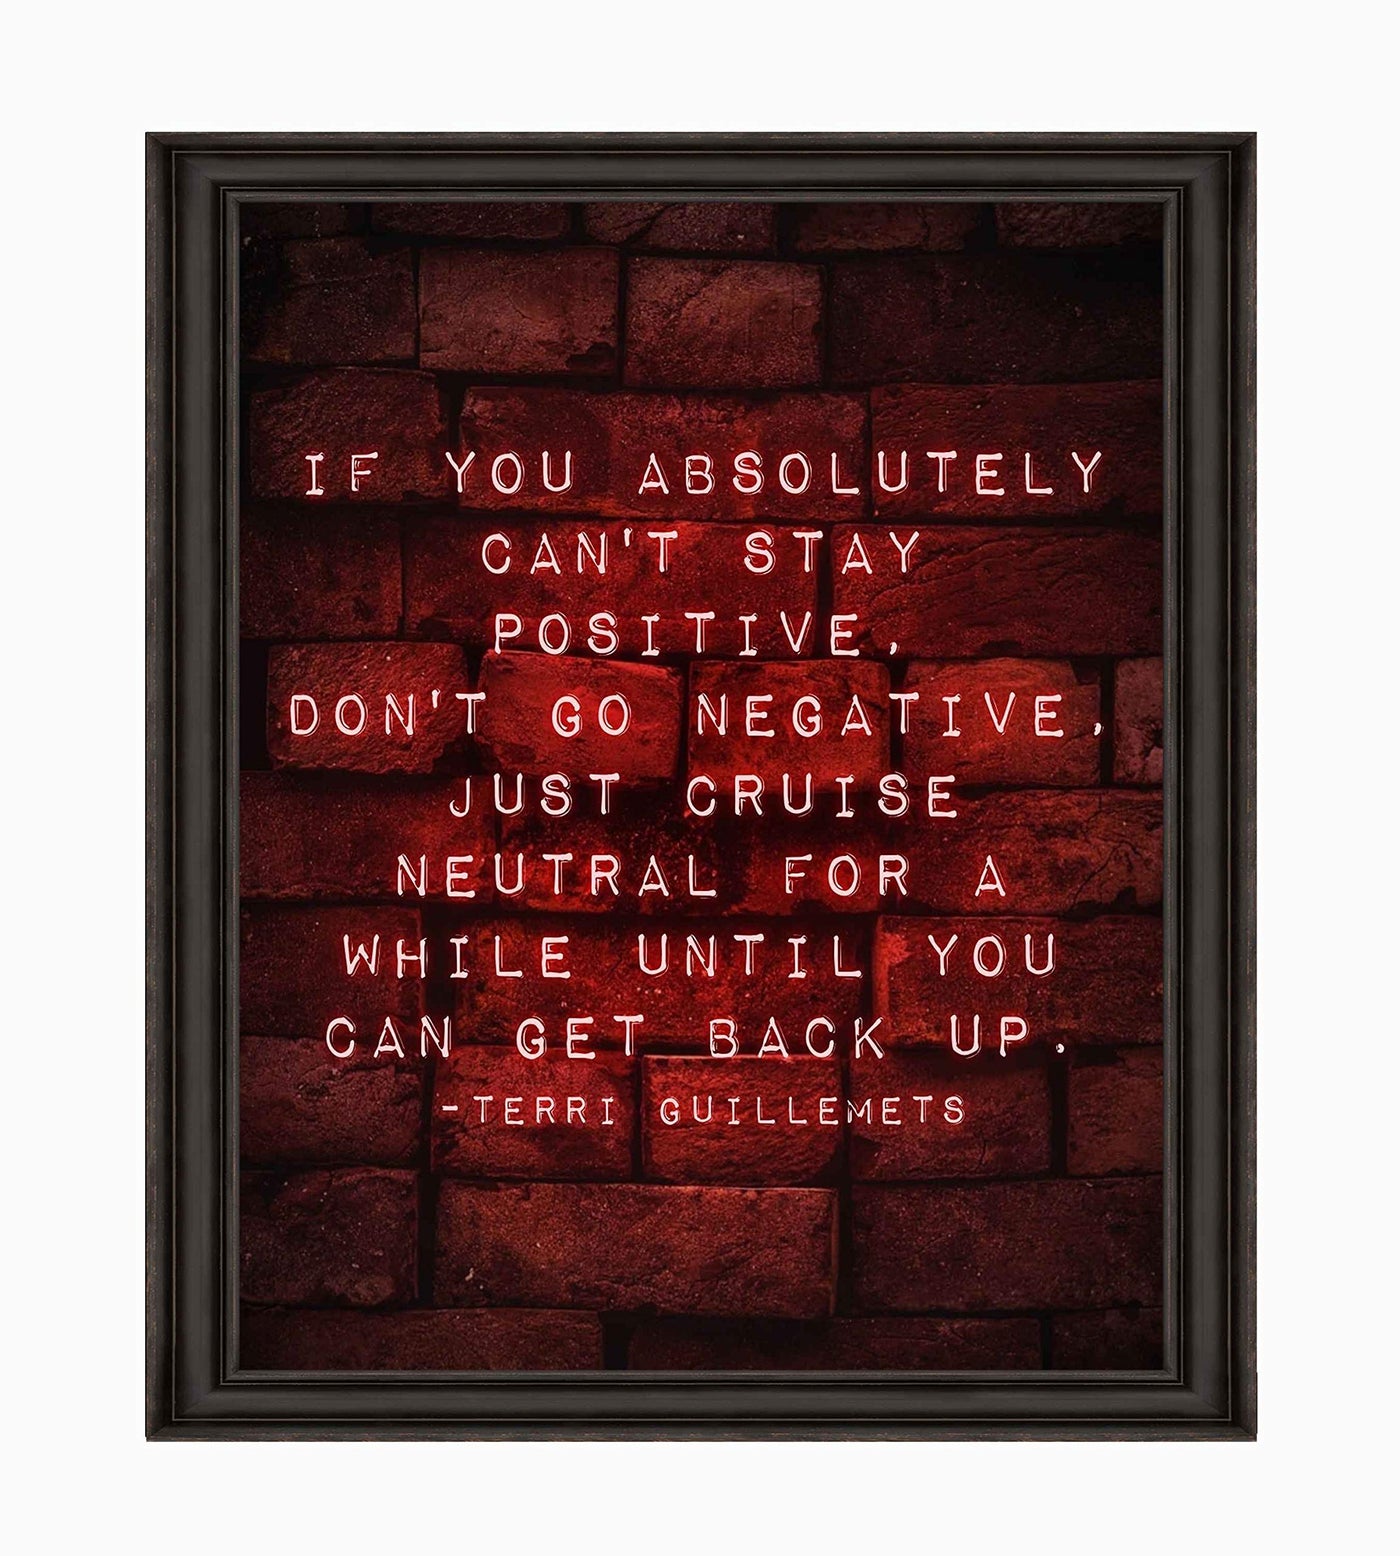 ?If You Can't Stay Positive-Don't Go Negative" Motivational Quotes Wall Art Sign -8x10" Typographic Poster Print w/Replica Brick Design-Ready to Frame. Inspirational Home-Office-School Decor.